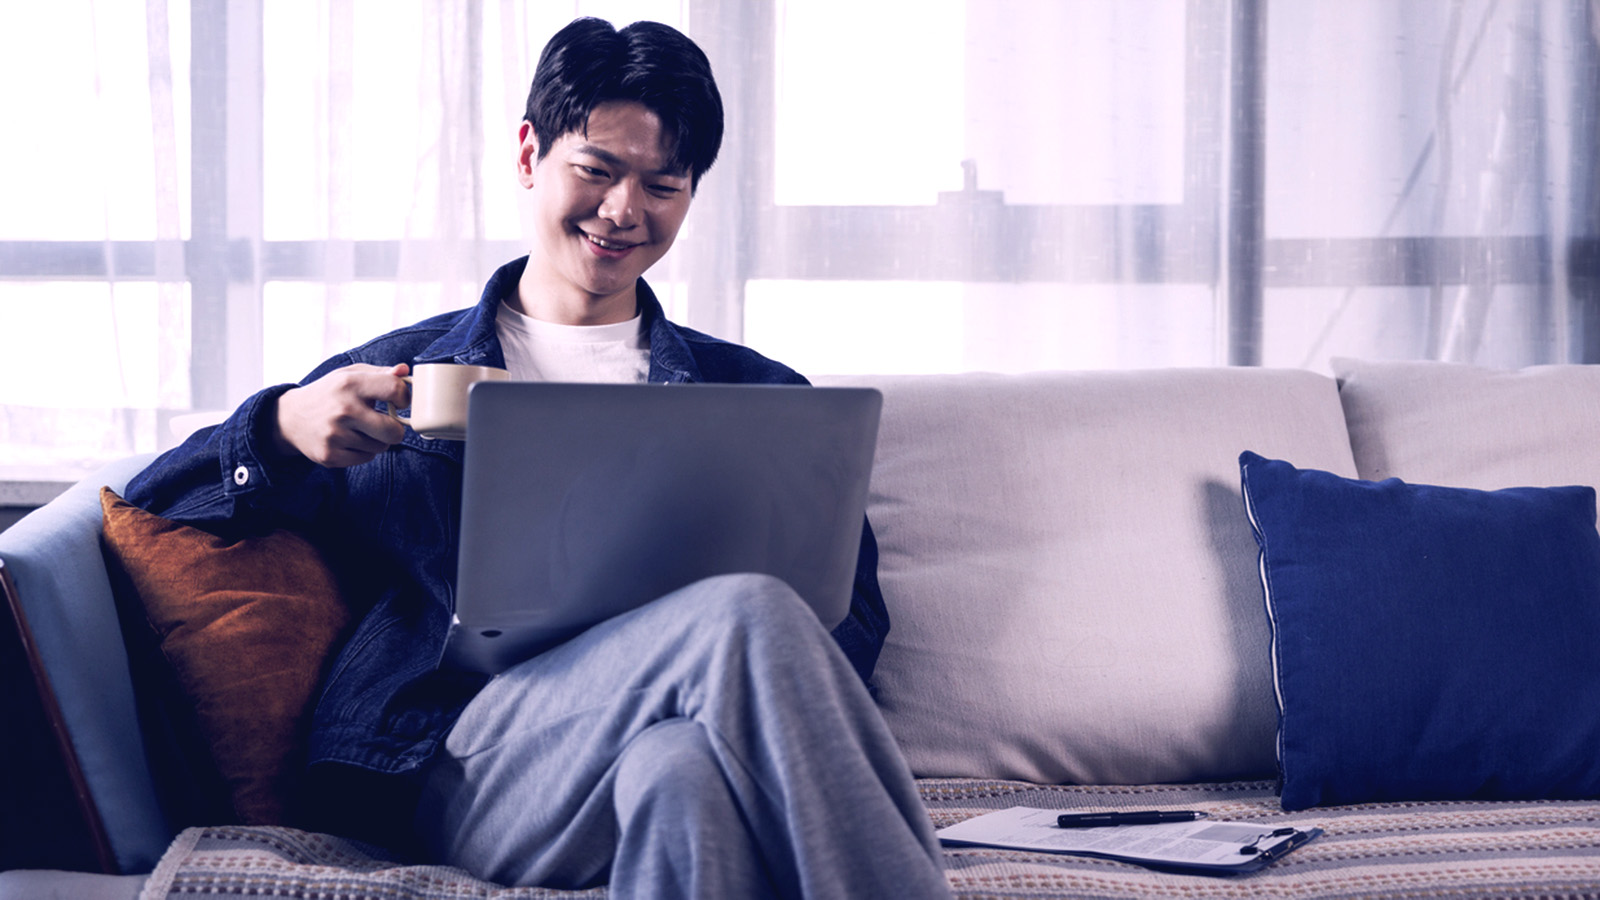 Man smiling on computer holding coffee while looking at laptop